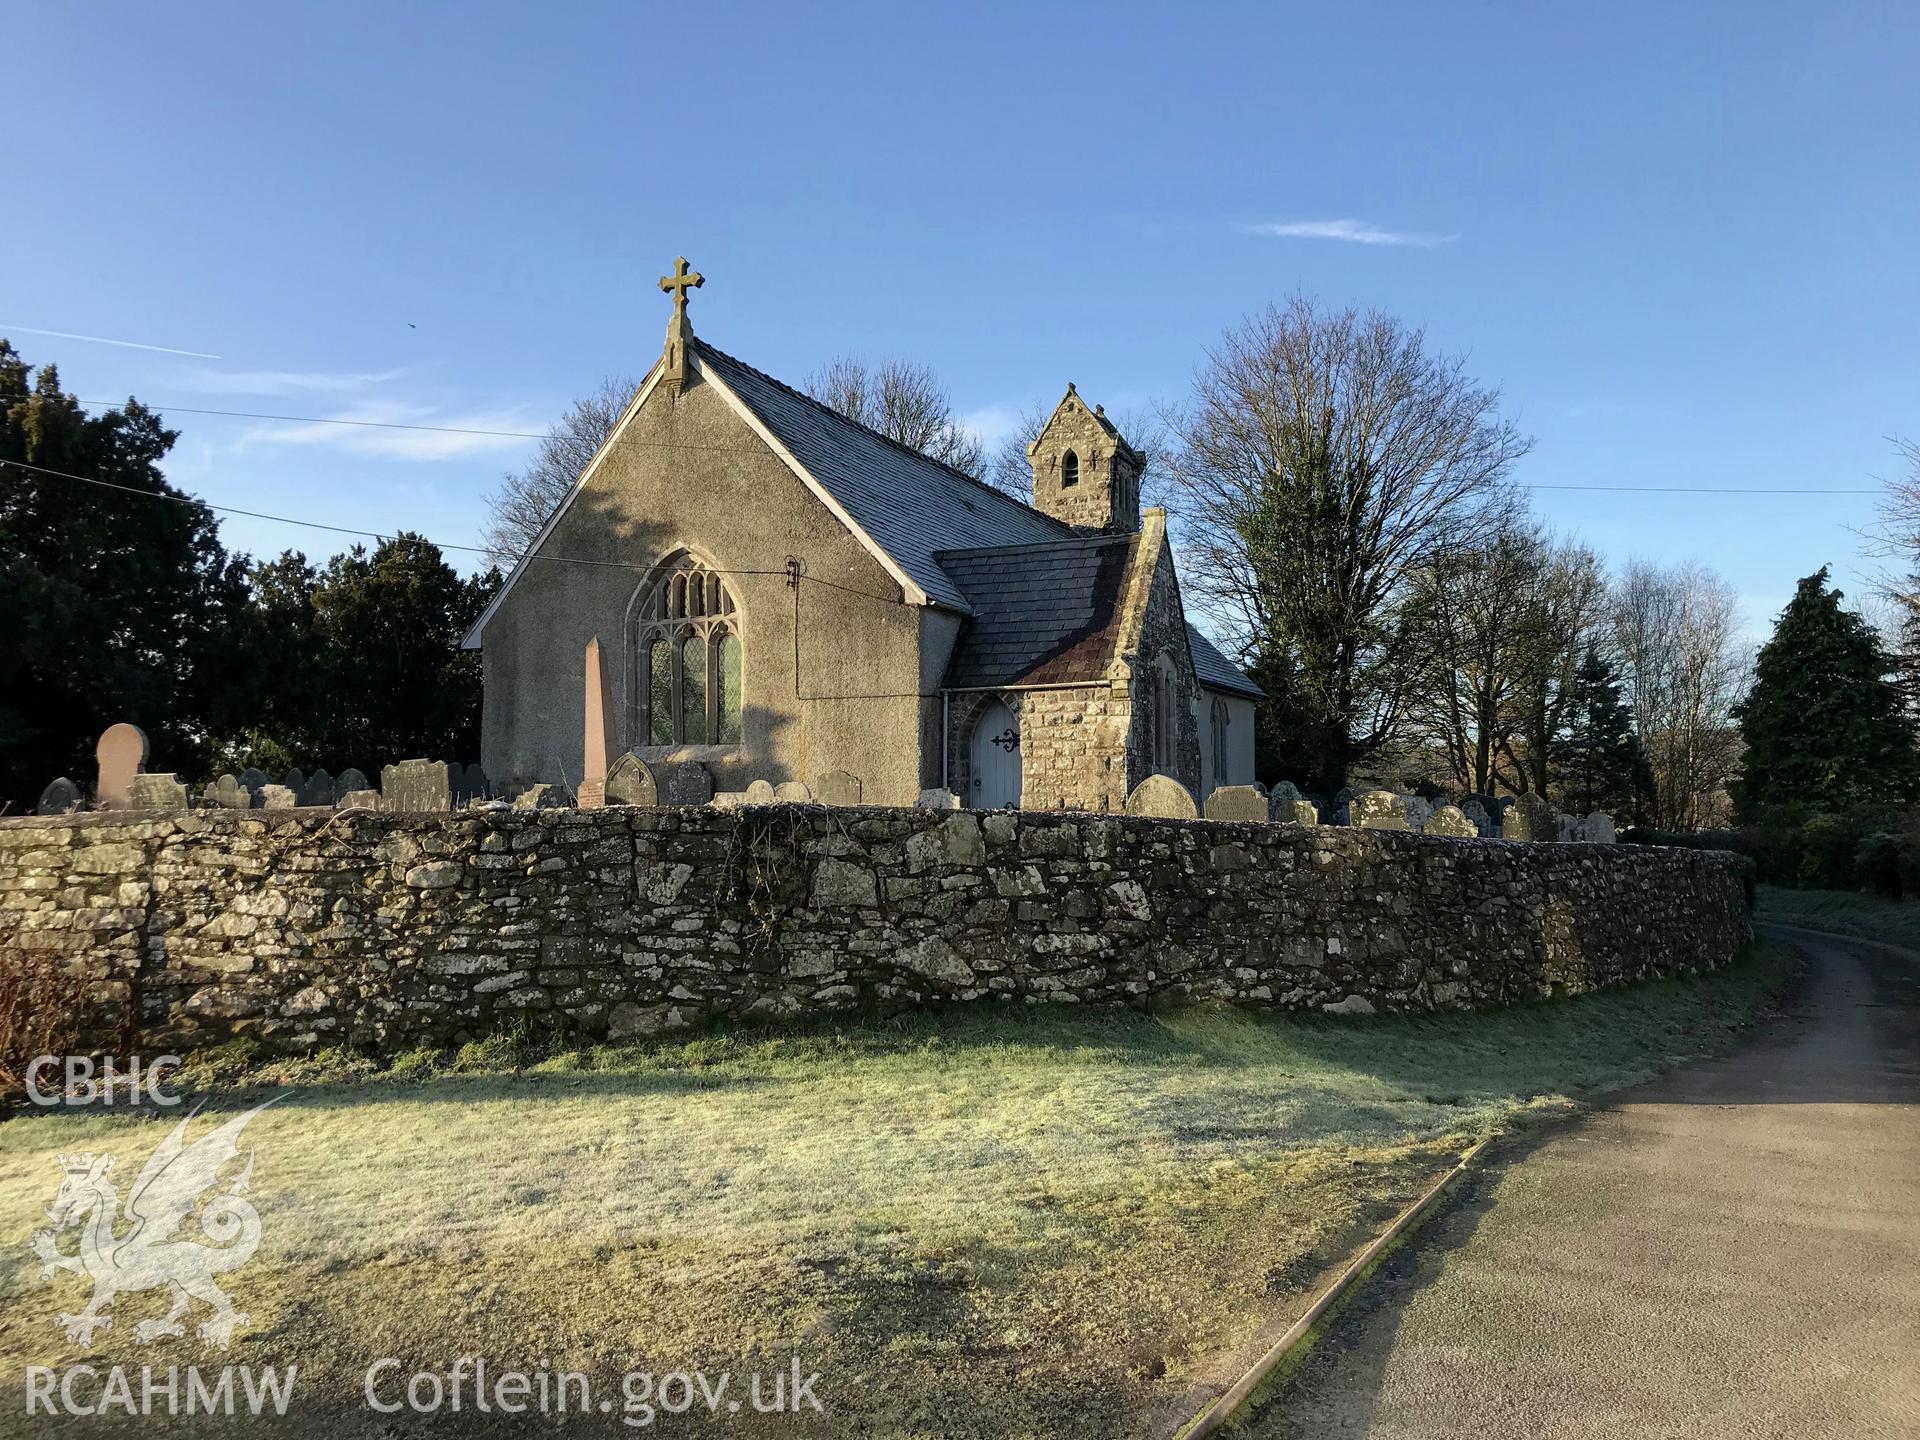 View from the north west showing exterior rear elevation of St. Cadfan's church, its graveyard and its boundary wall, Llangadfan. Colour photograph taken by Paul R. Davis on 2nd January 2019.